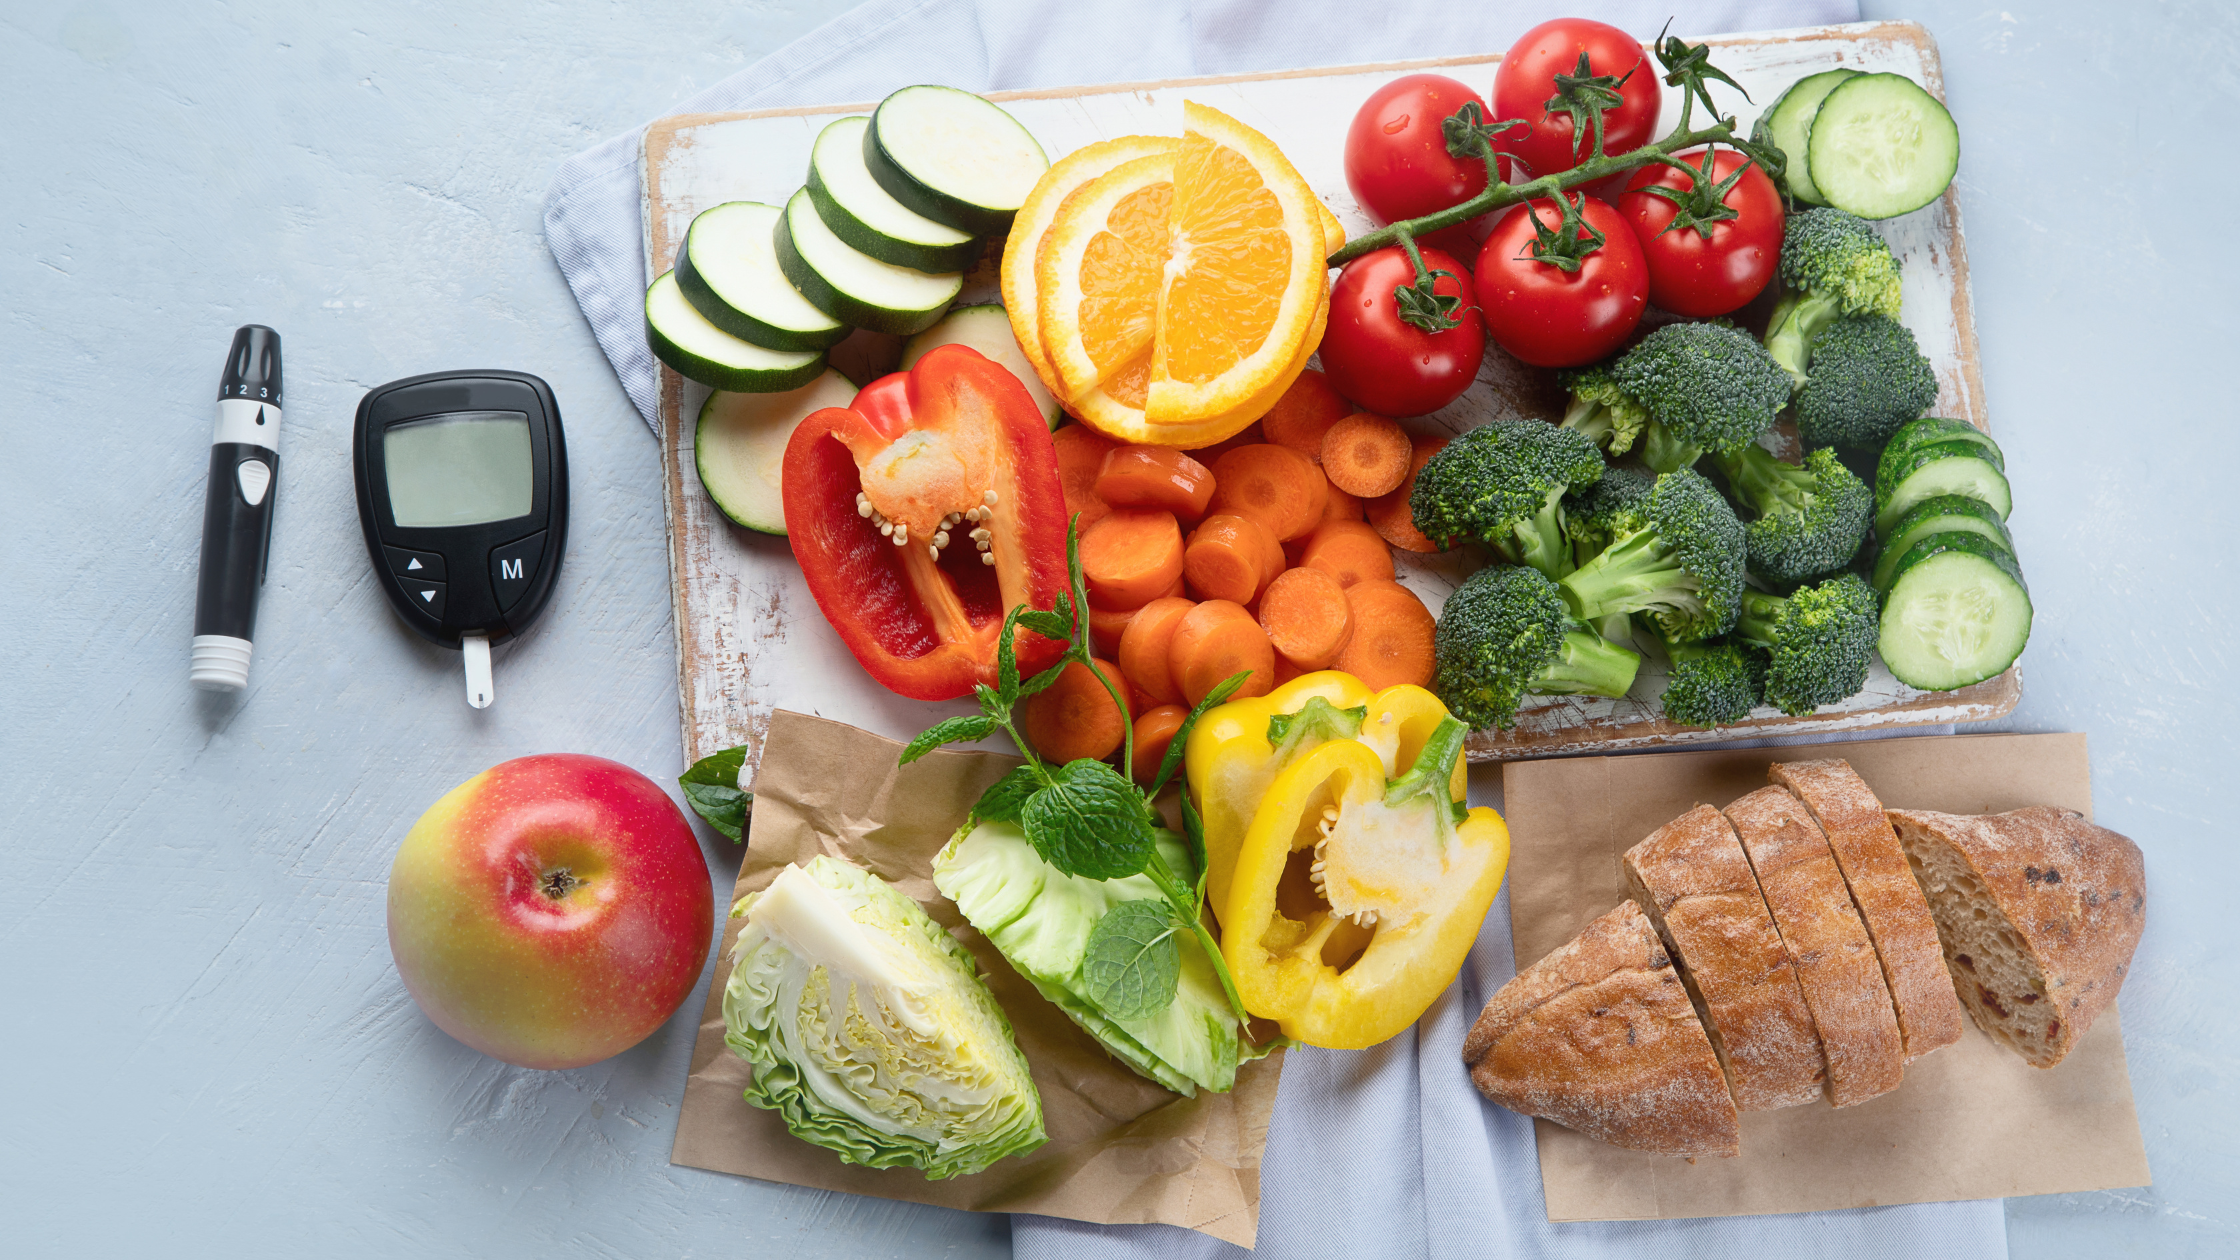 healthy food ingredients alongside a glucose monitoring device